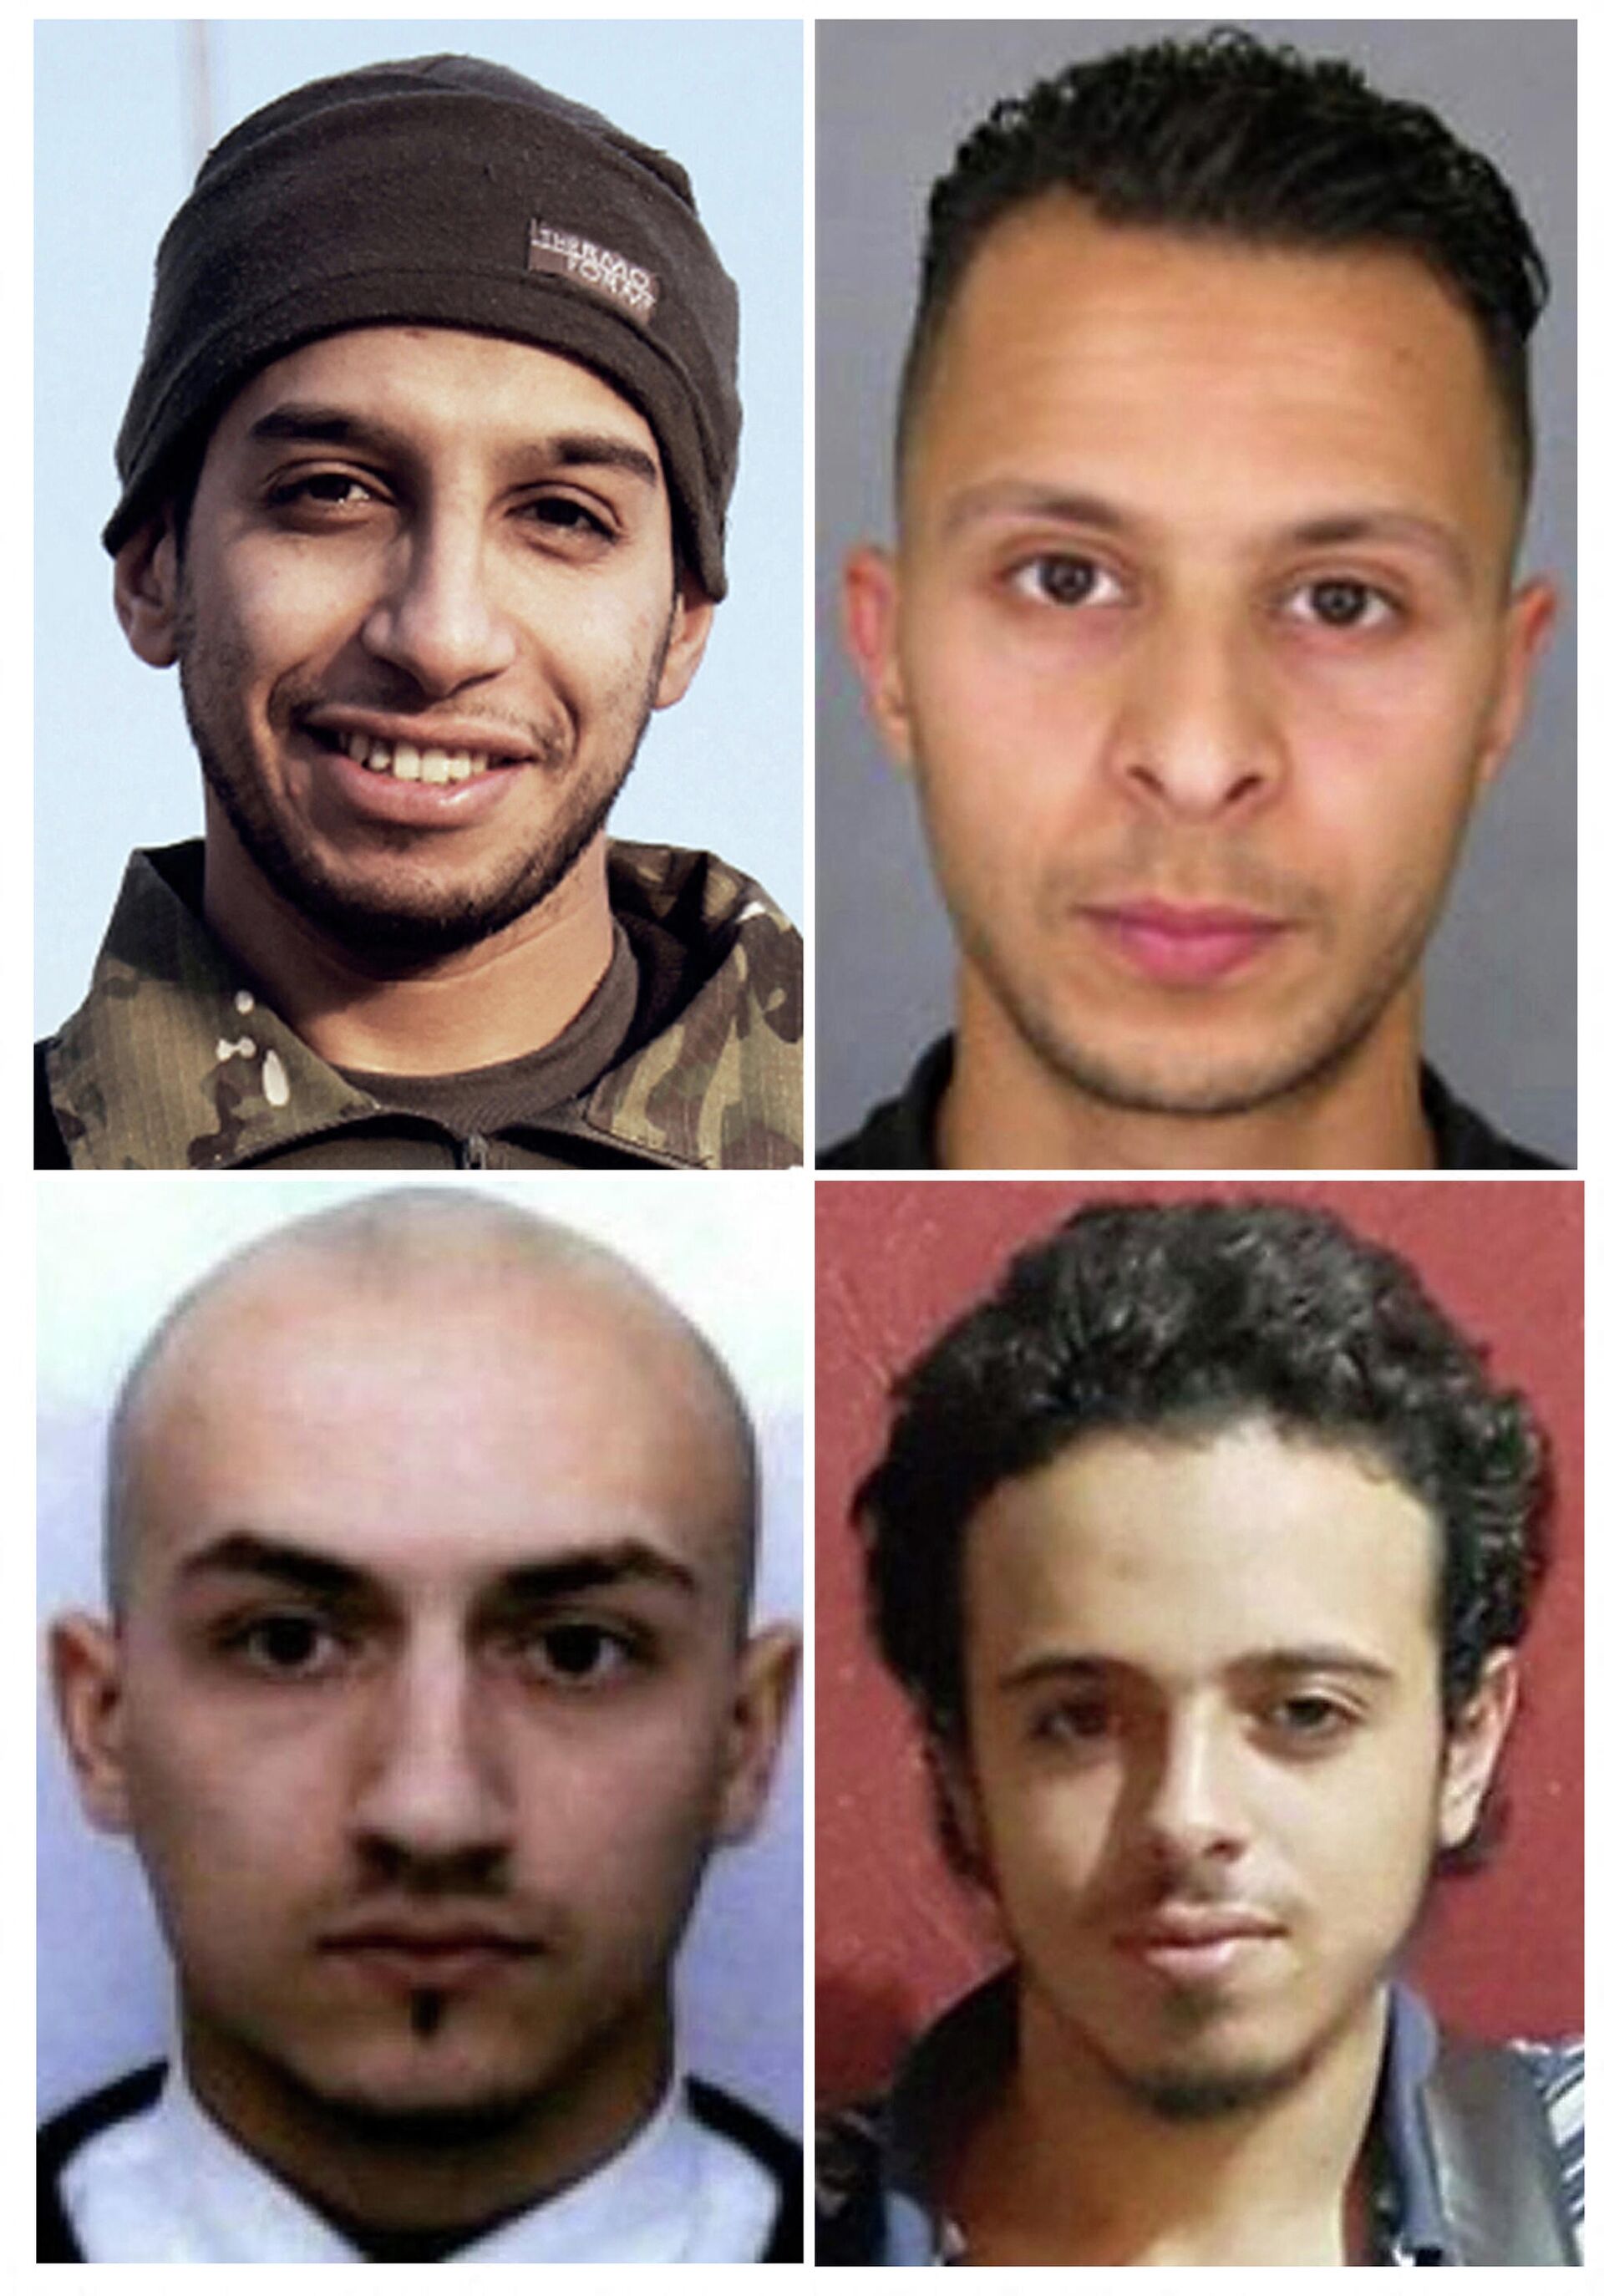 This combination of photos made in Paris on November 17, 2015 shows four men, two suicide bombers who died during the November 13, 2015 Paris attacks, and two others suspected to be implicated. Clockwise from top left : The attack's suspected mastermind at large, 28-year-old Belgian IS group leading militant Abdelhamid Abaaoud - Suspect at large French national Salah Abdeslam, 26 - French national Bilal Hadfi, 20, one of the suicide bombers who blew himself outside the Stade de France stadium -  Samy Amimour, 28, one of the suicide bombers who attacked a Paris concert hall - Sputnik International, 1920, 09.09.2021